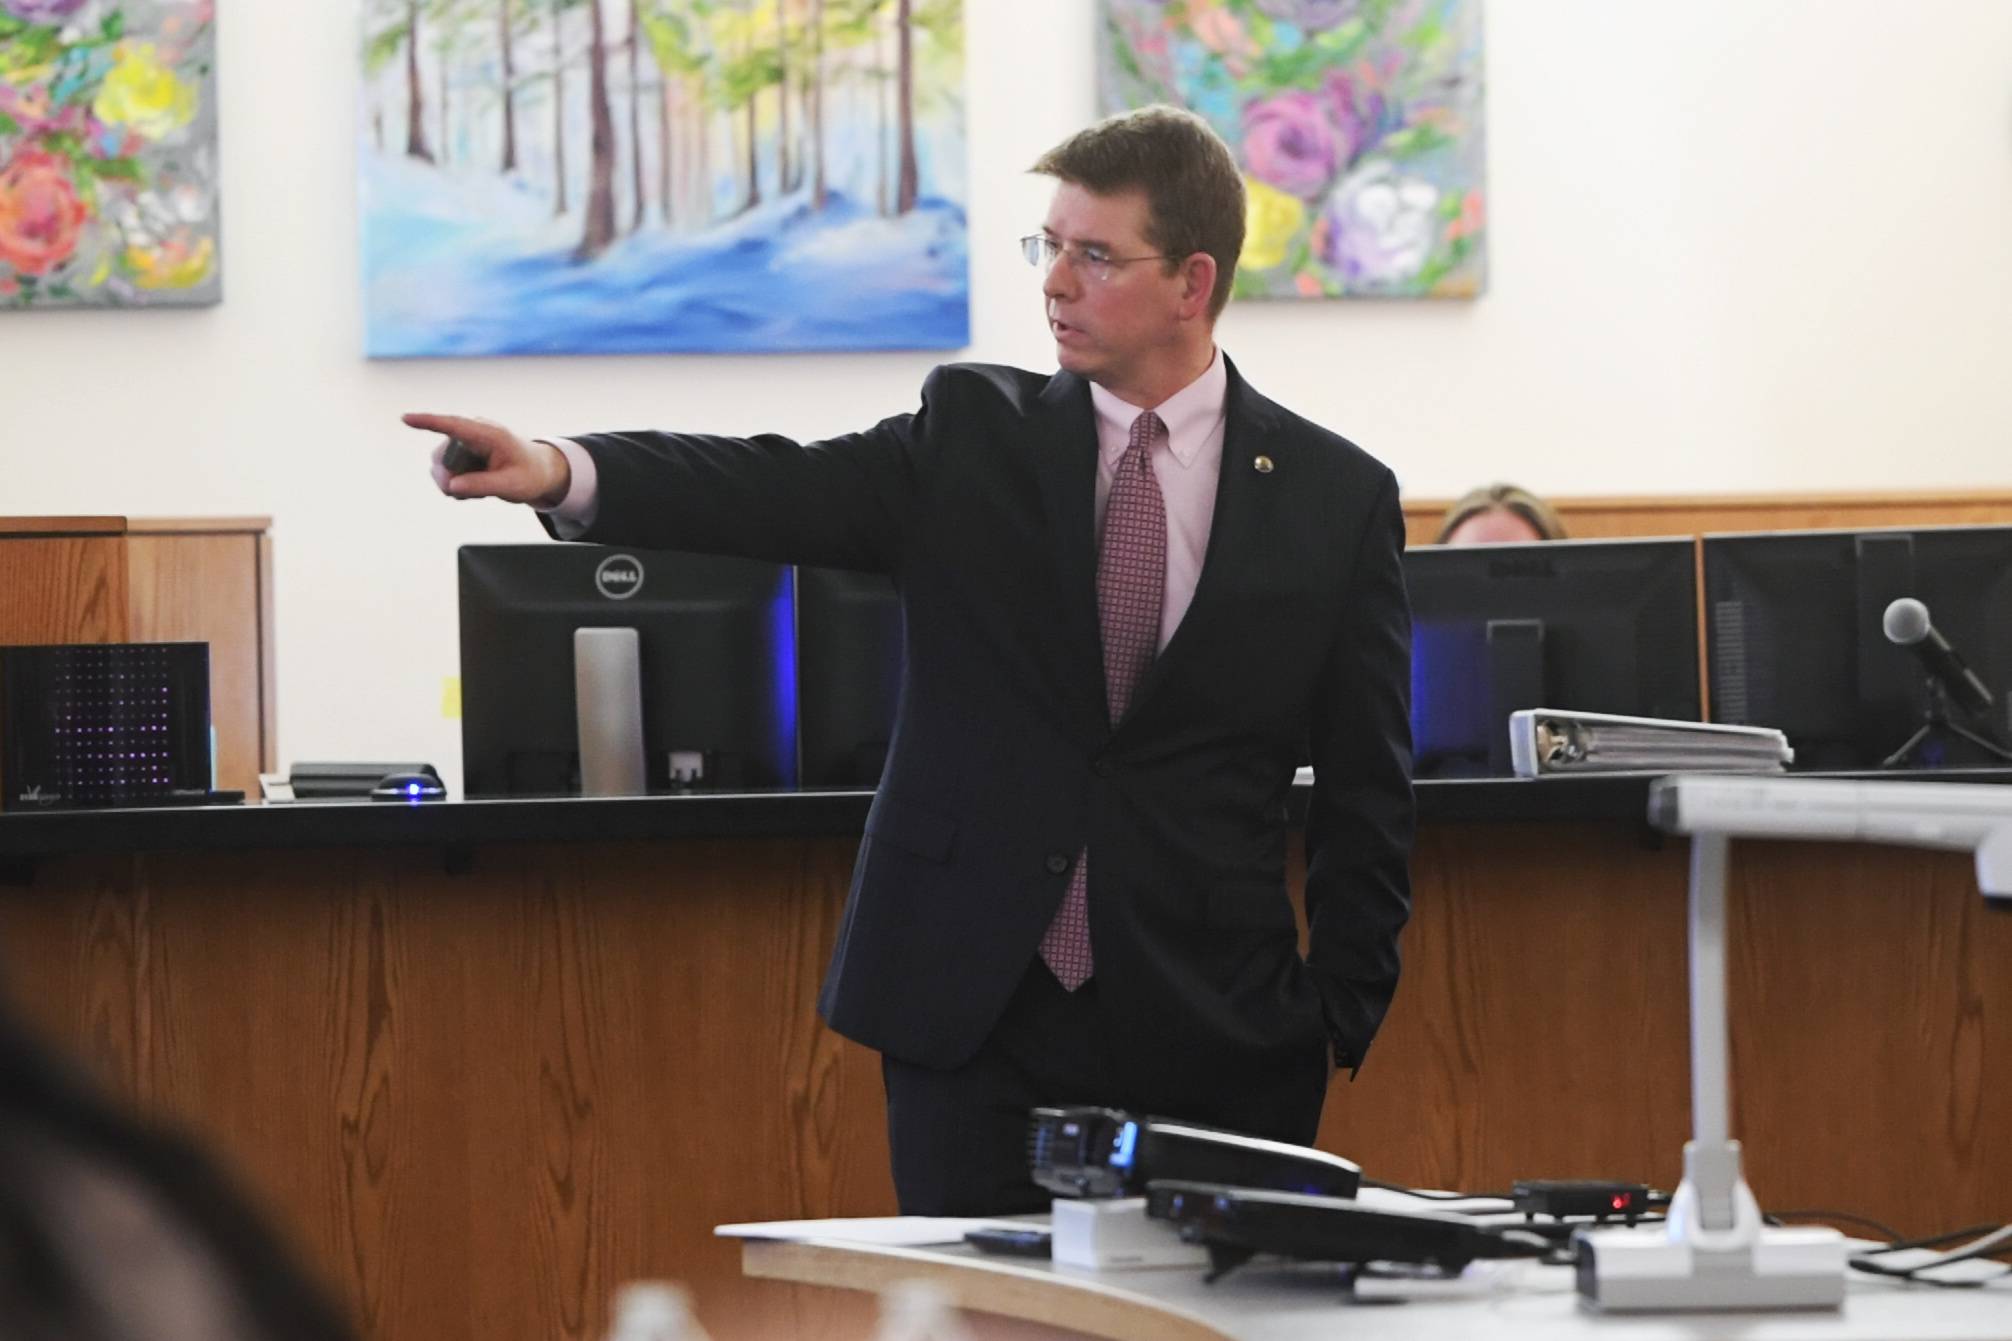 Prosecuting Attorney John Darnall, from the Office of Special Prosecutions, gives his closing argument in Juneau Superior Court on Monday, Oct. 7, 2019, during the trial of Laron Carlton Graham. Graham is facing two counts of first-degree murder for the November 2015 shooting deaths of 36-year-old Robert H. Meireis and 34-year-old Elizabeth K. Tonsmeire. (Michael Penn | Juneau Empire)